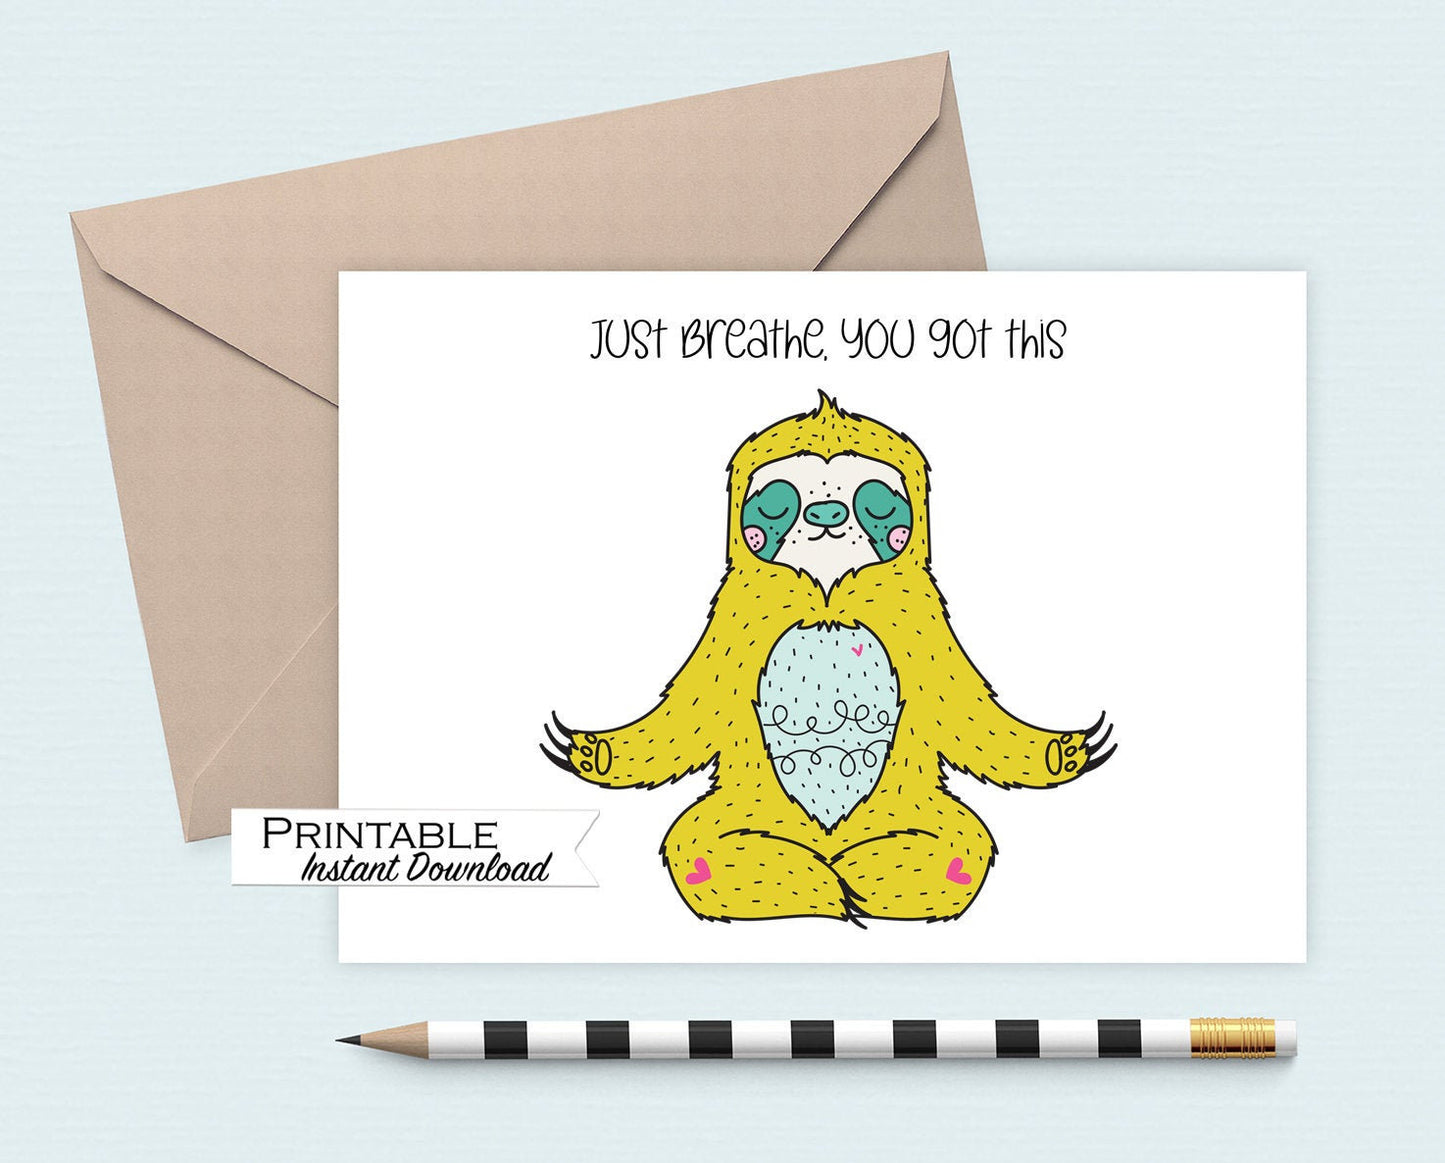 Just Breathe - You got this Card Printable - Digital Download